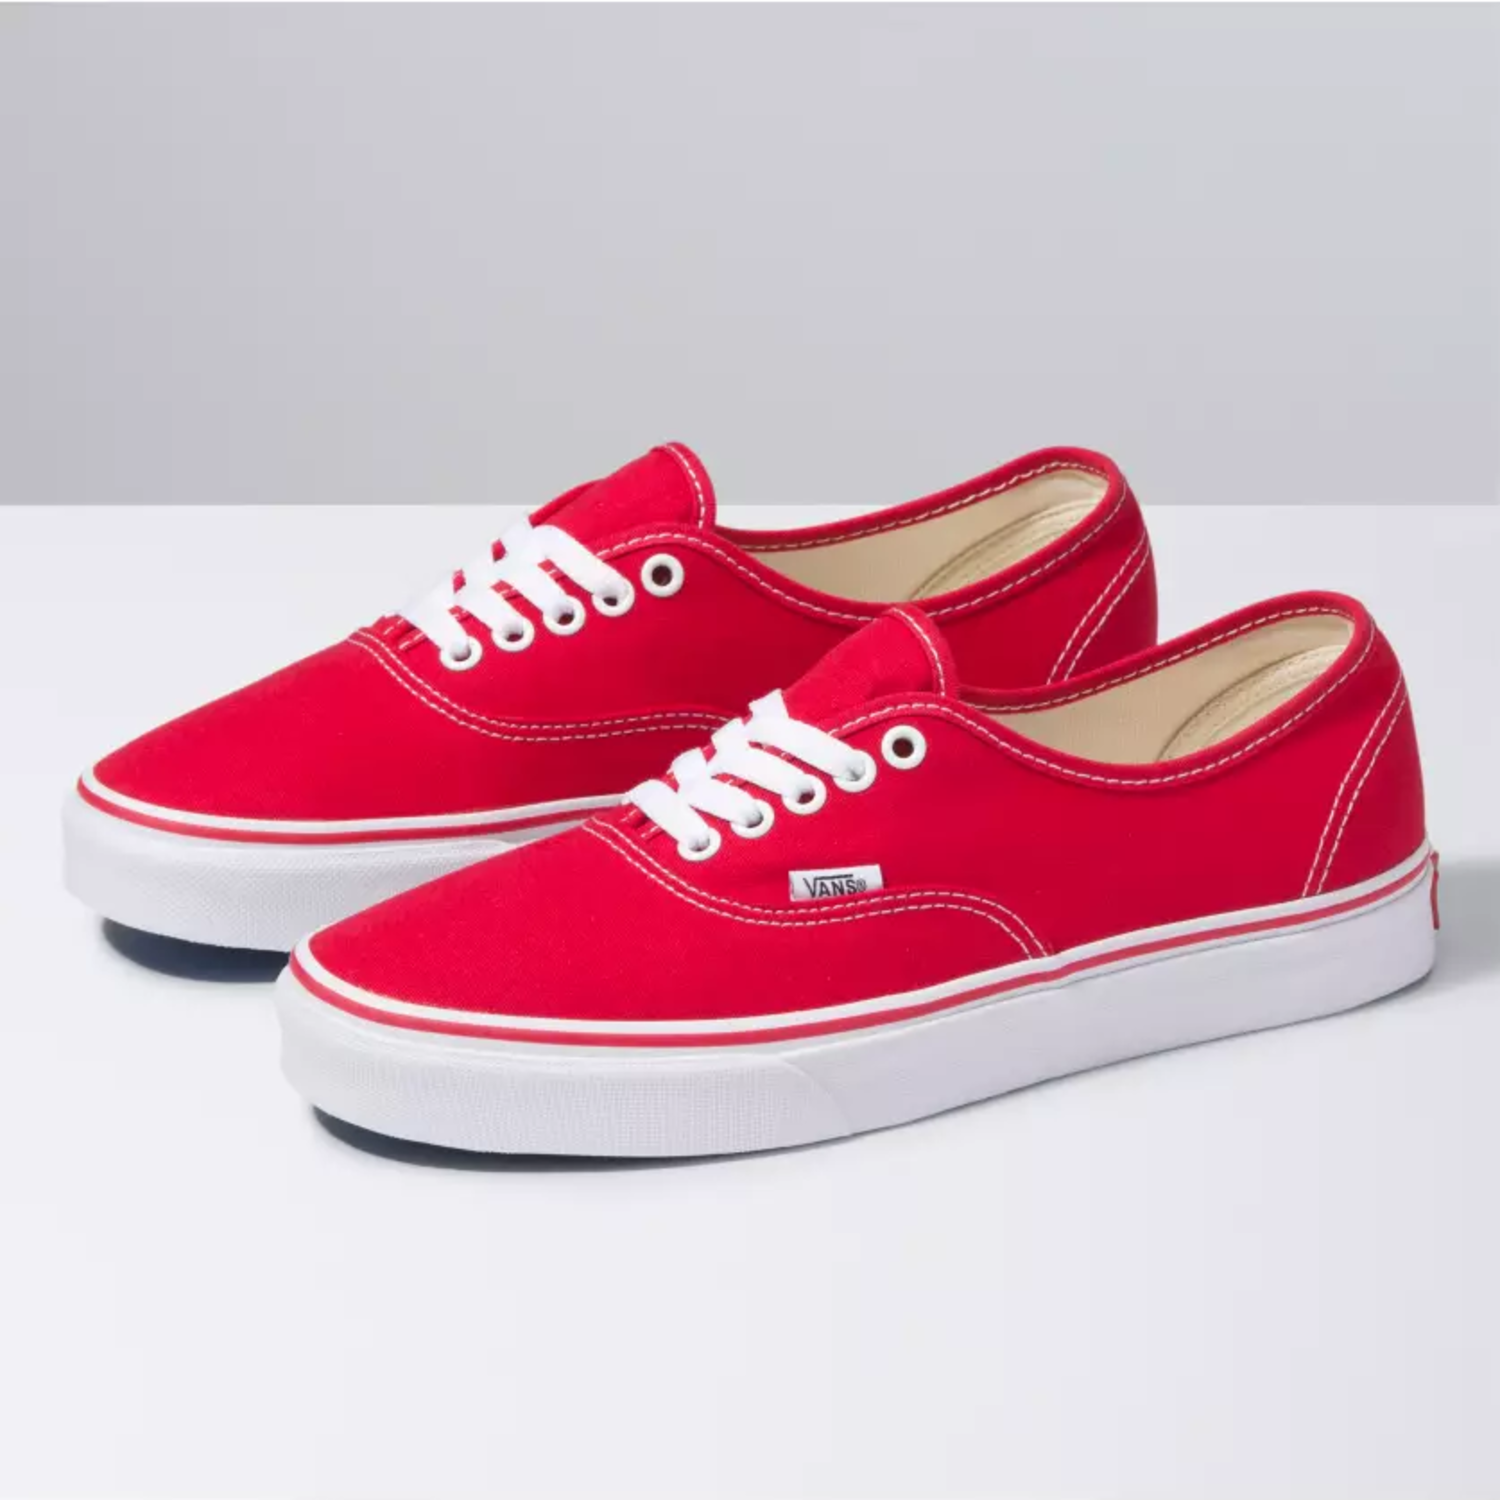 all red authentic vans